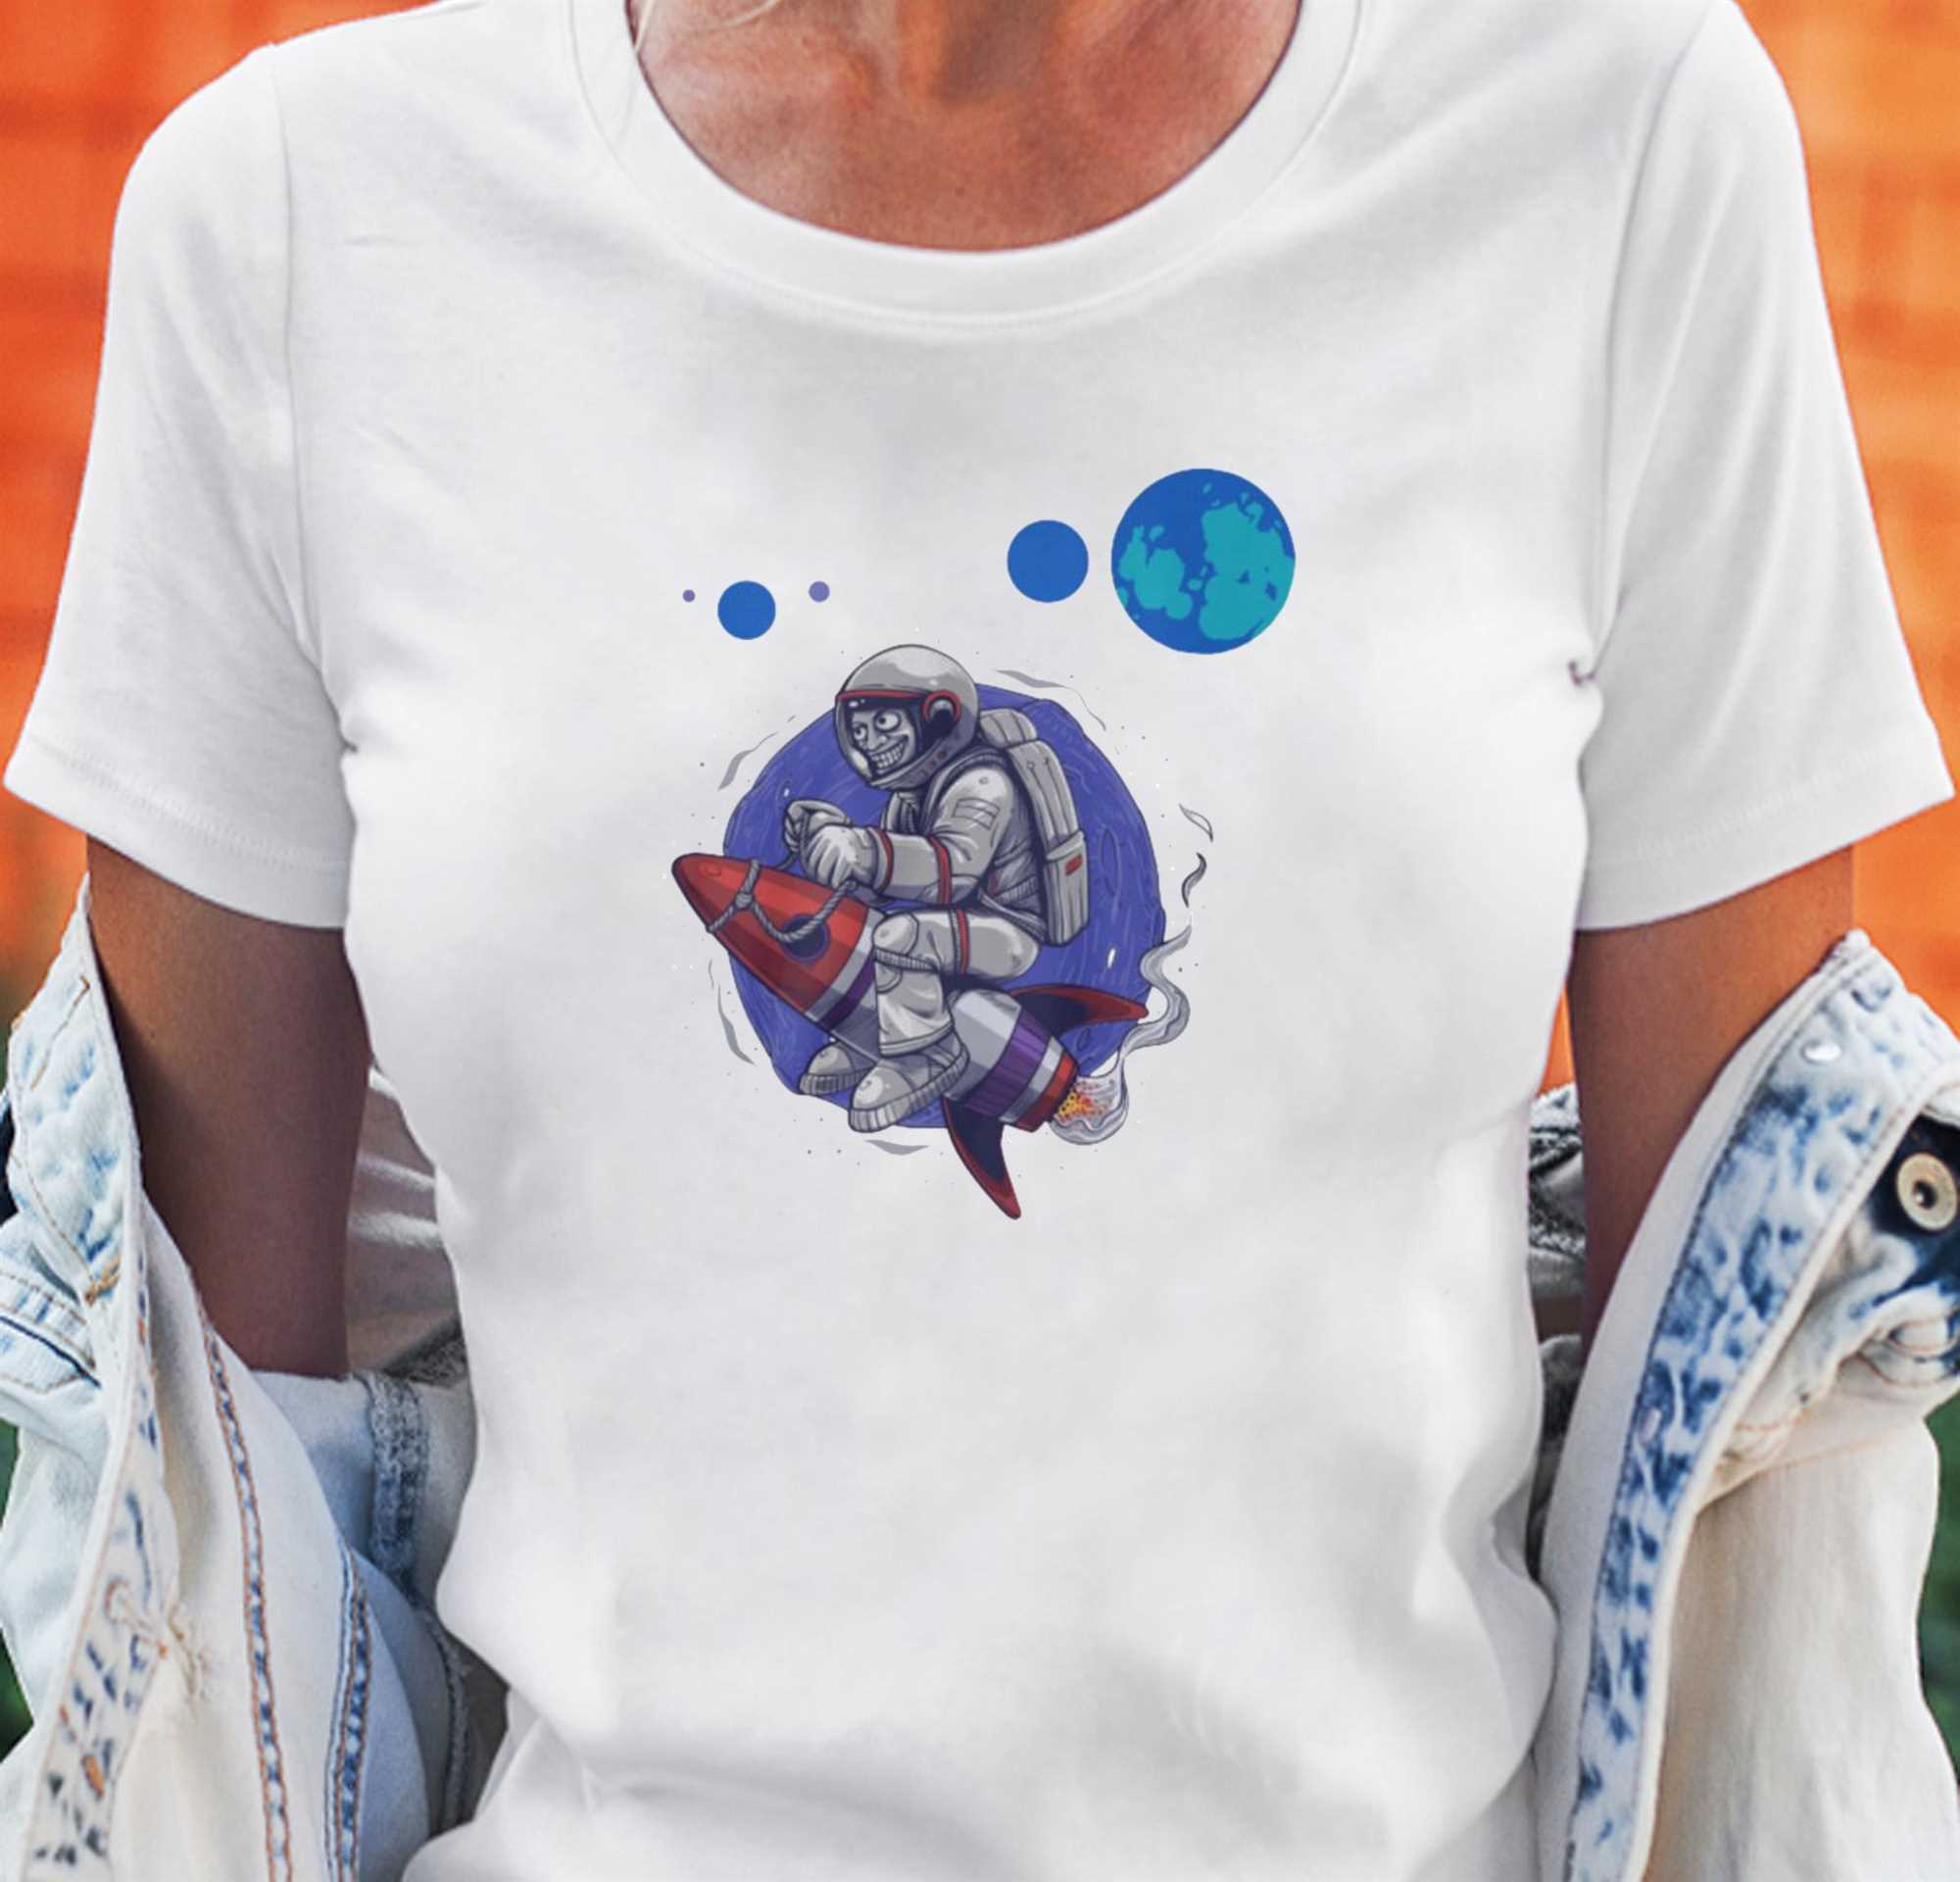 Punktlighed Distraktion kontrollere This Is A Space Reference Top T Shirt - Shibtee Clothing